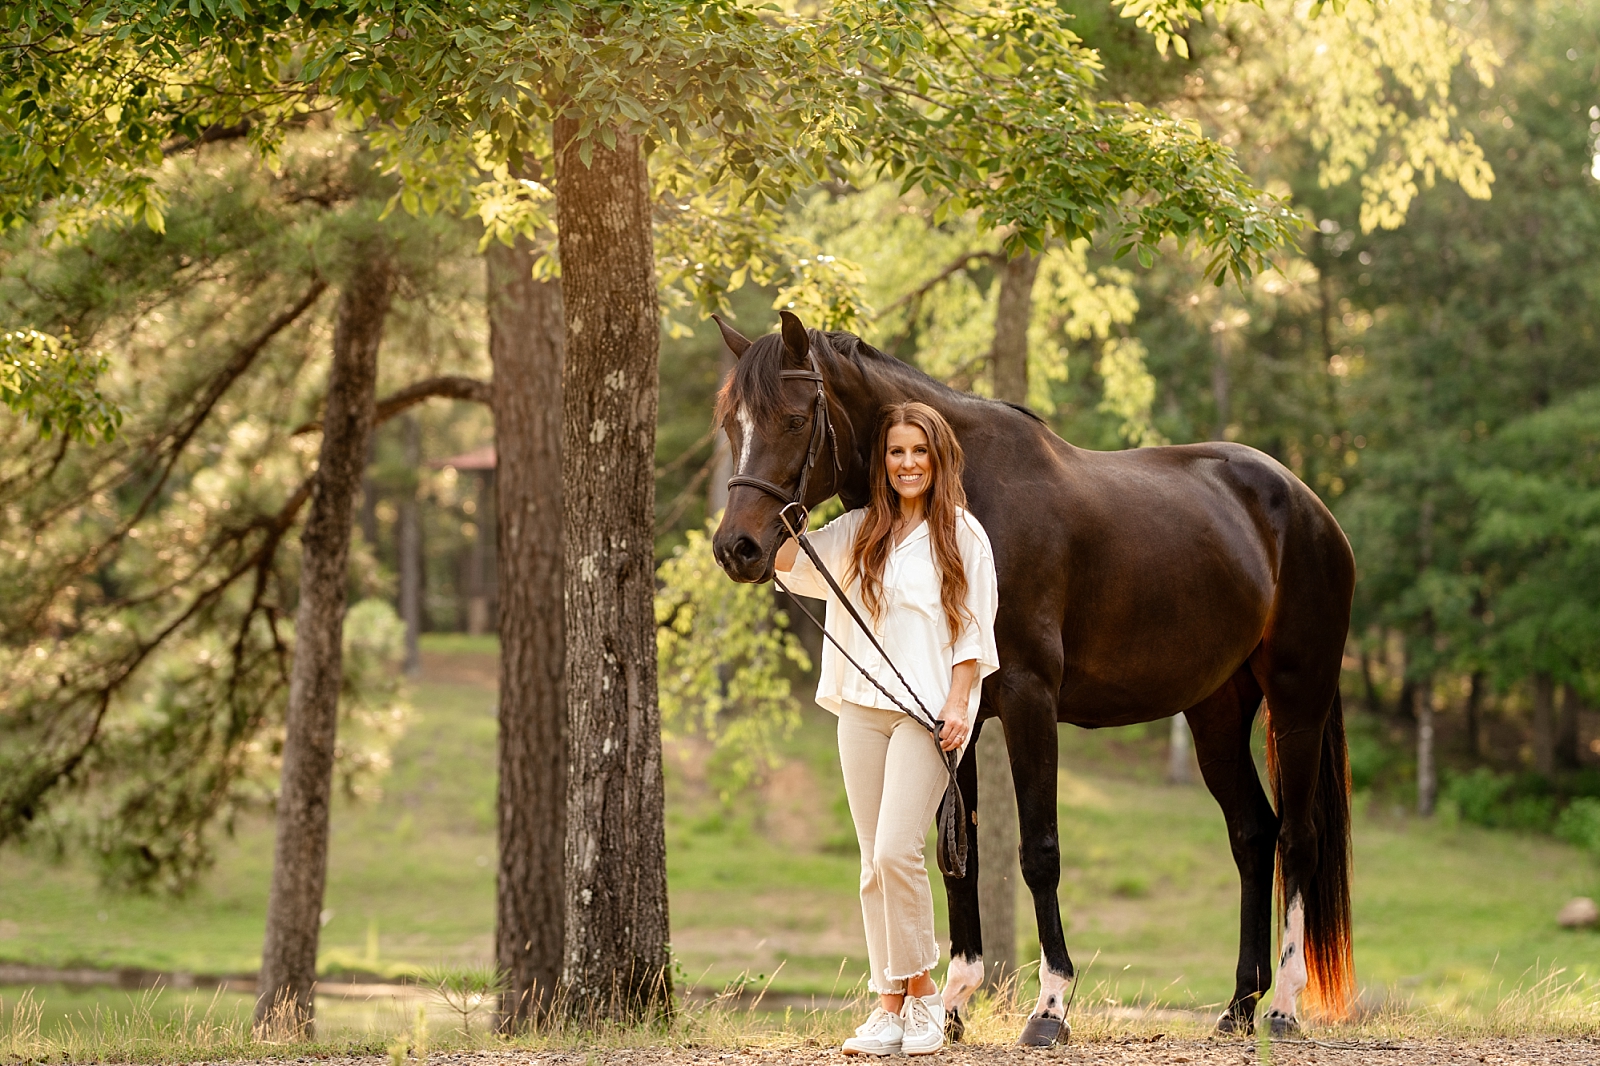 Horse and rider photos taken in Birmingham Alabama by professional equine photographer in Alabama.